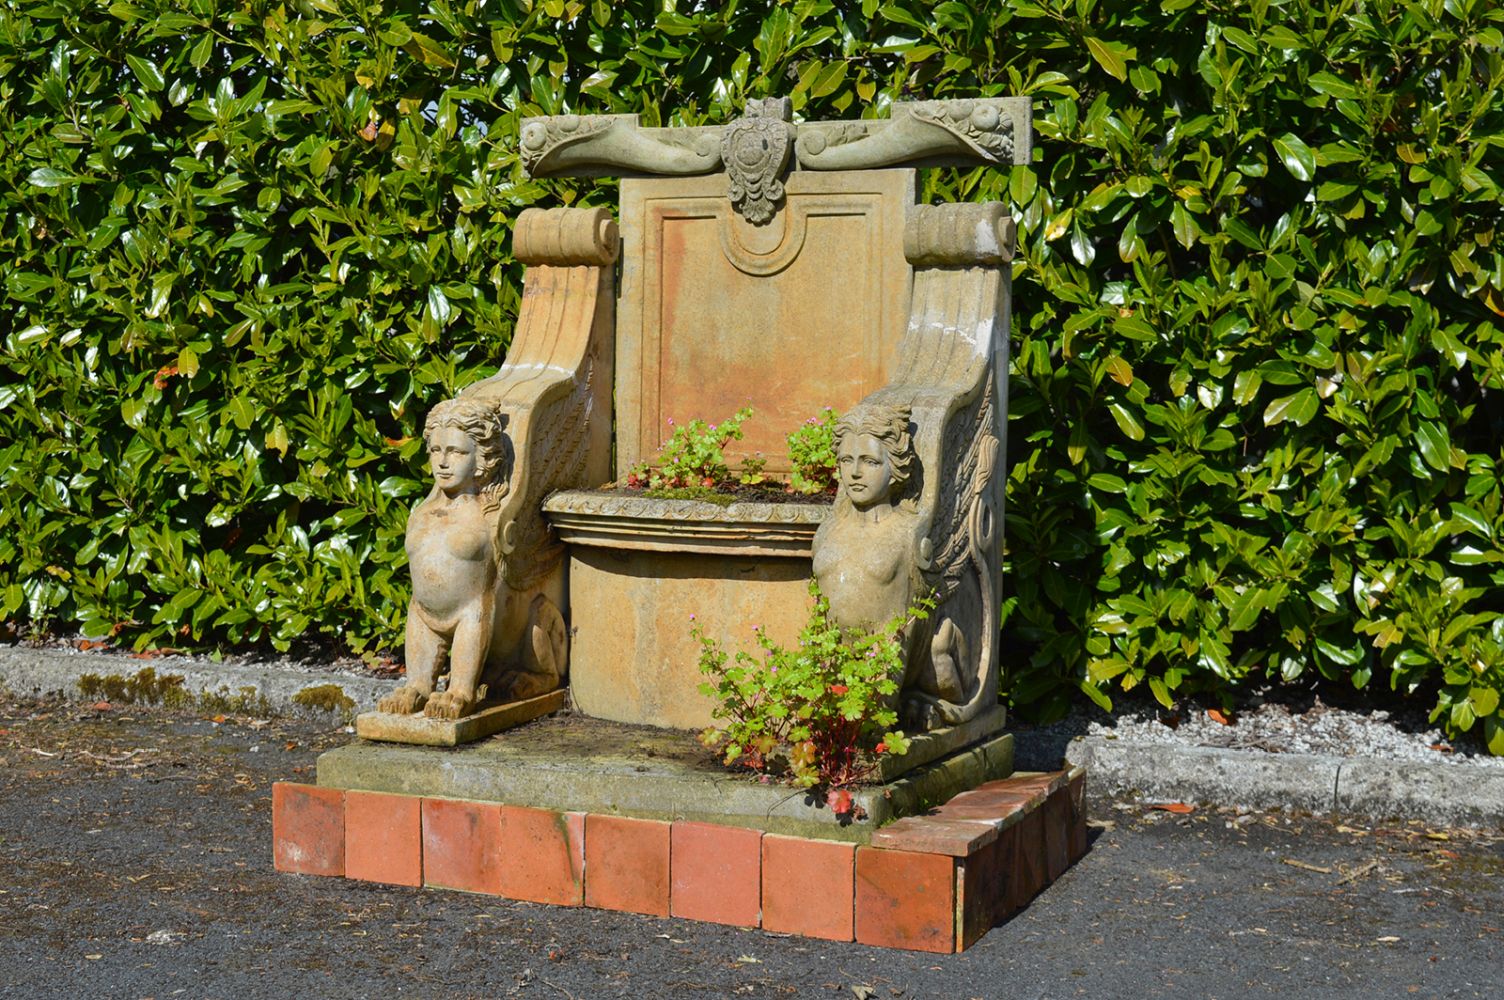 MOULDED STONE CEREMONIAL GARDEN SEAT